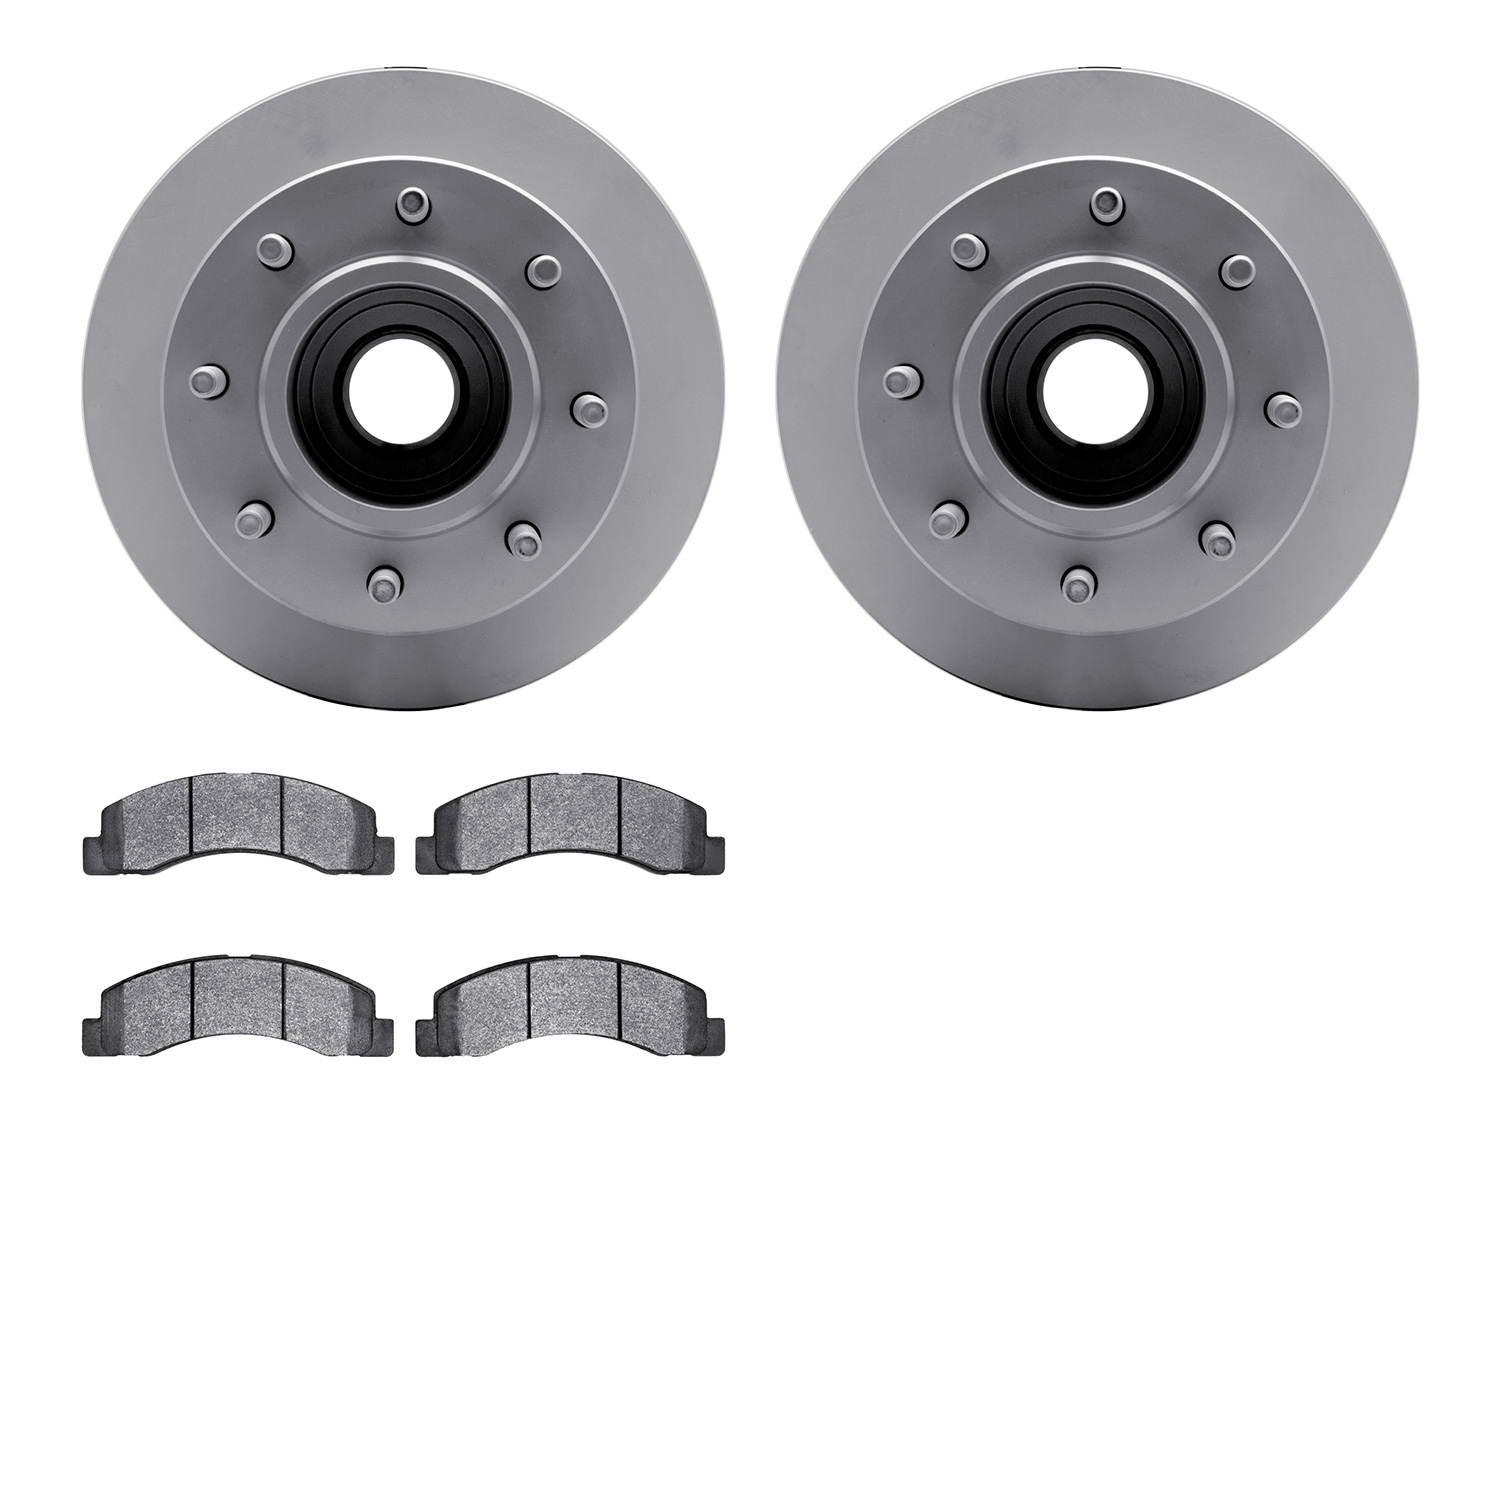 4402-54026 Geospec Brake Rotors with Ultimate-Duty Brake Pads Kit, 1999-2002 Ford/Lincoln/Mercury/Mazda, Position: Front